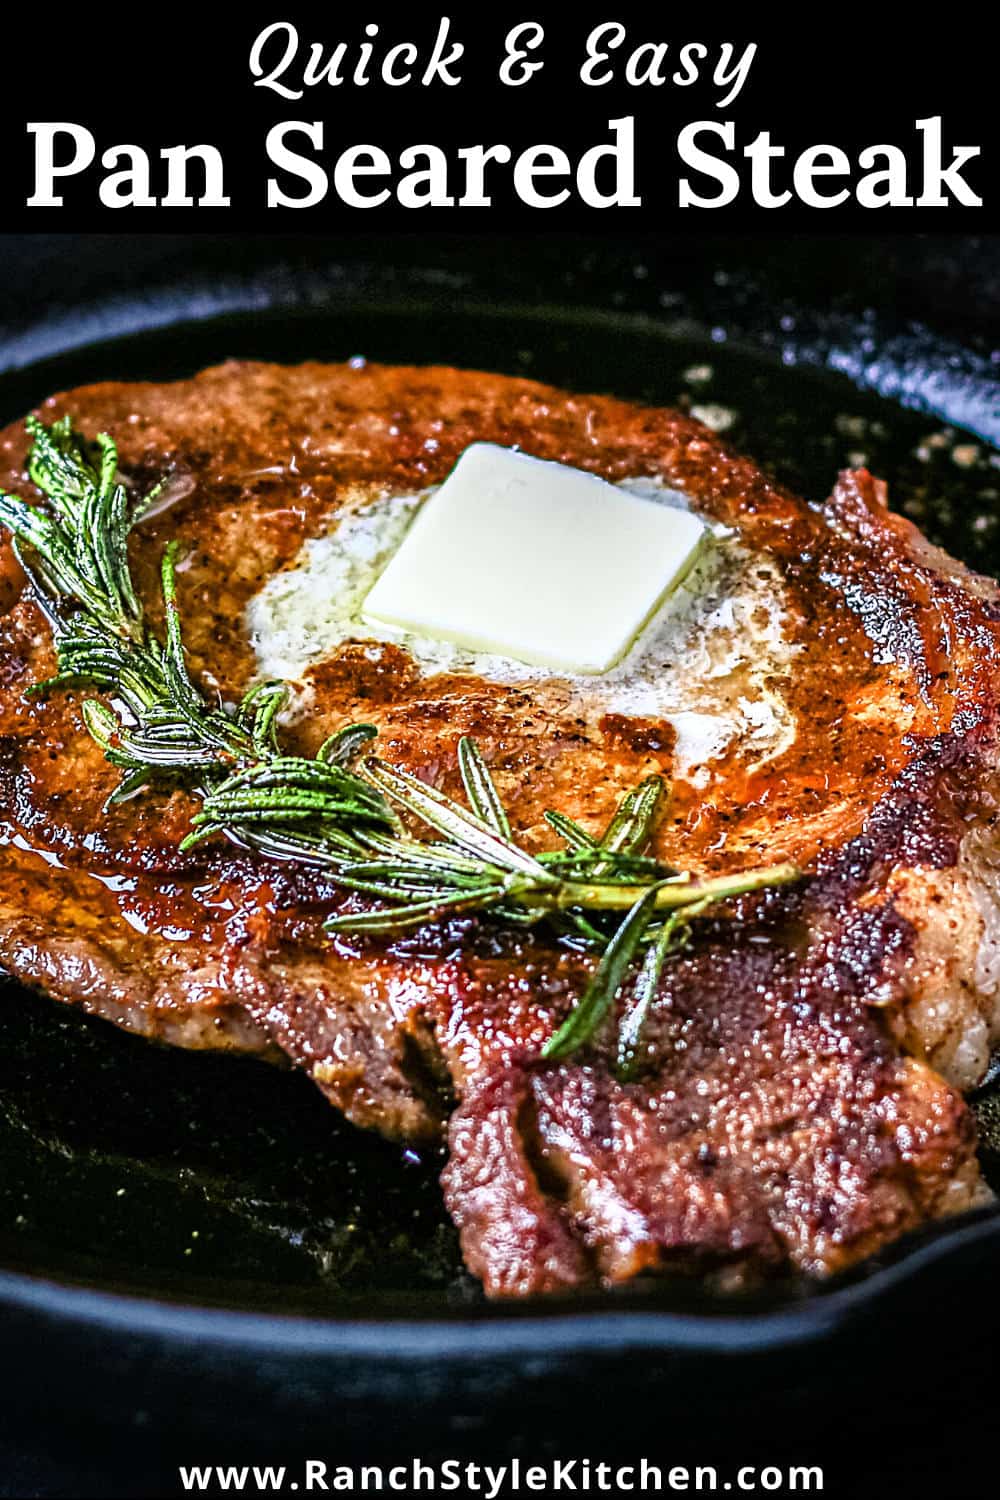 Juicy steak in a cast iron skillet garnished with butter and rosemary.